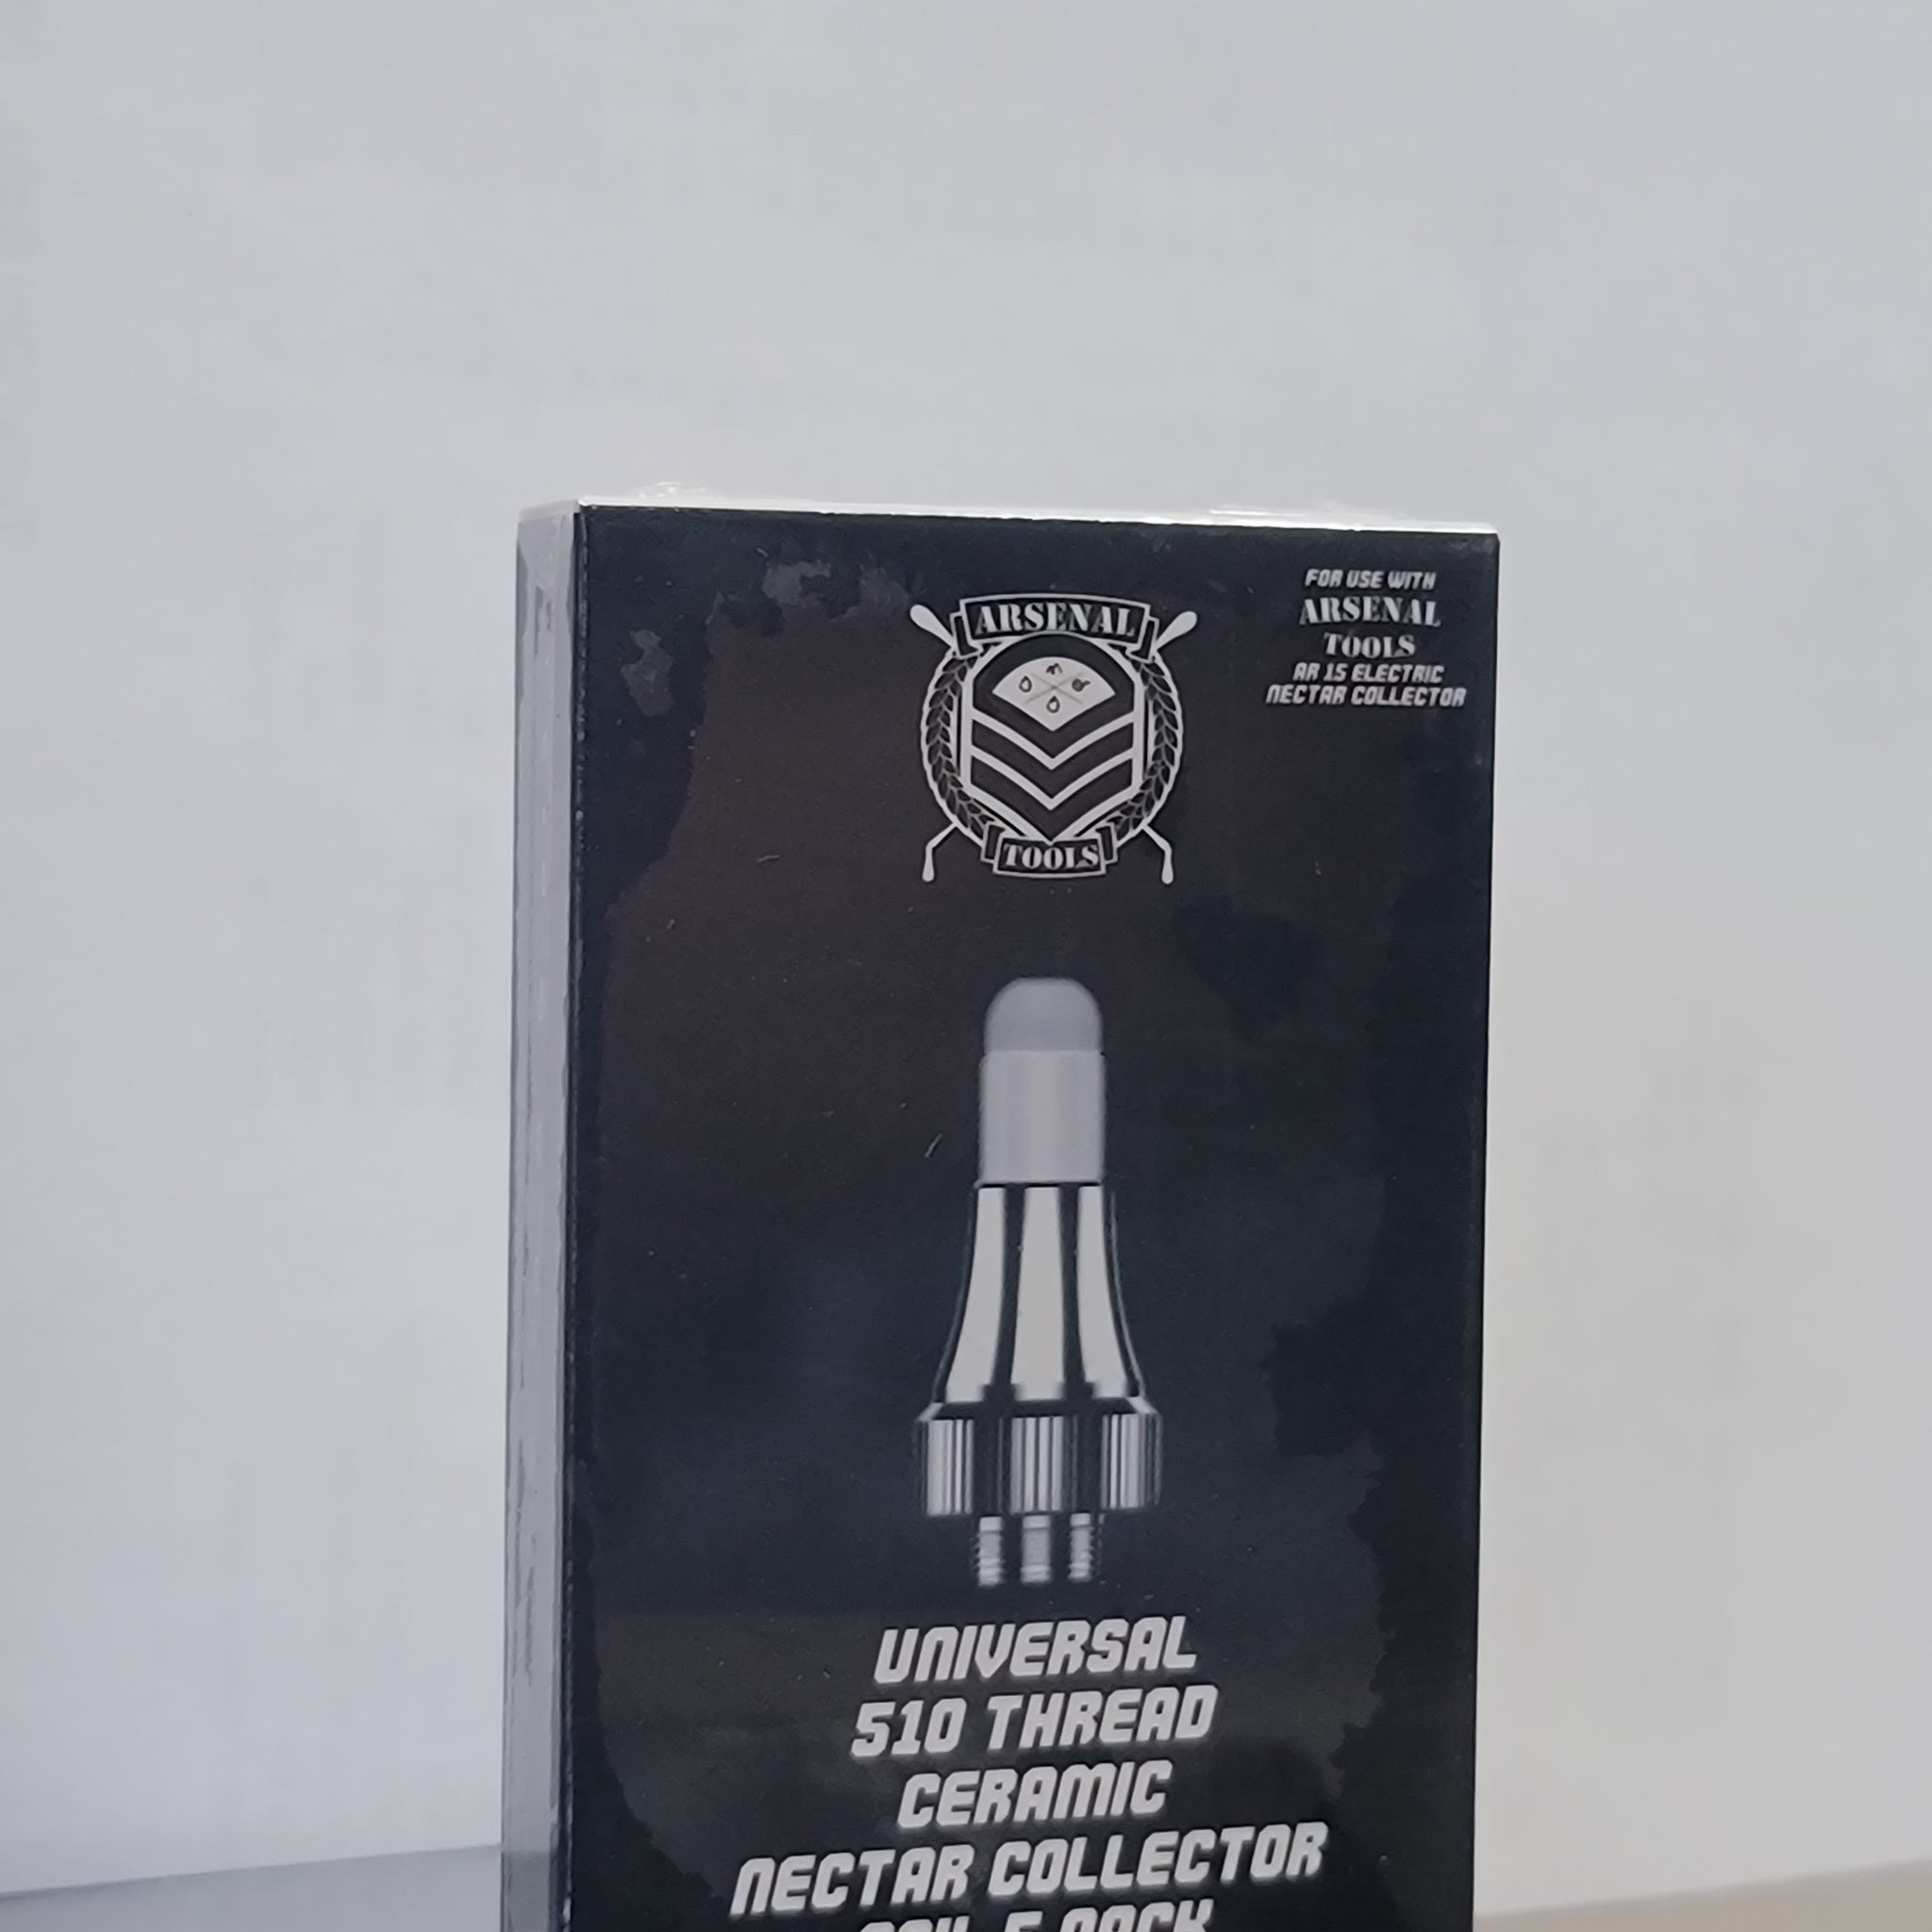 Nectar Collector Coil (5) packs